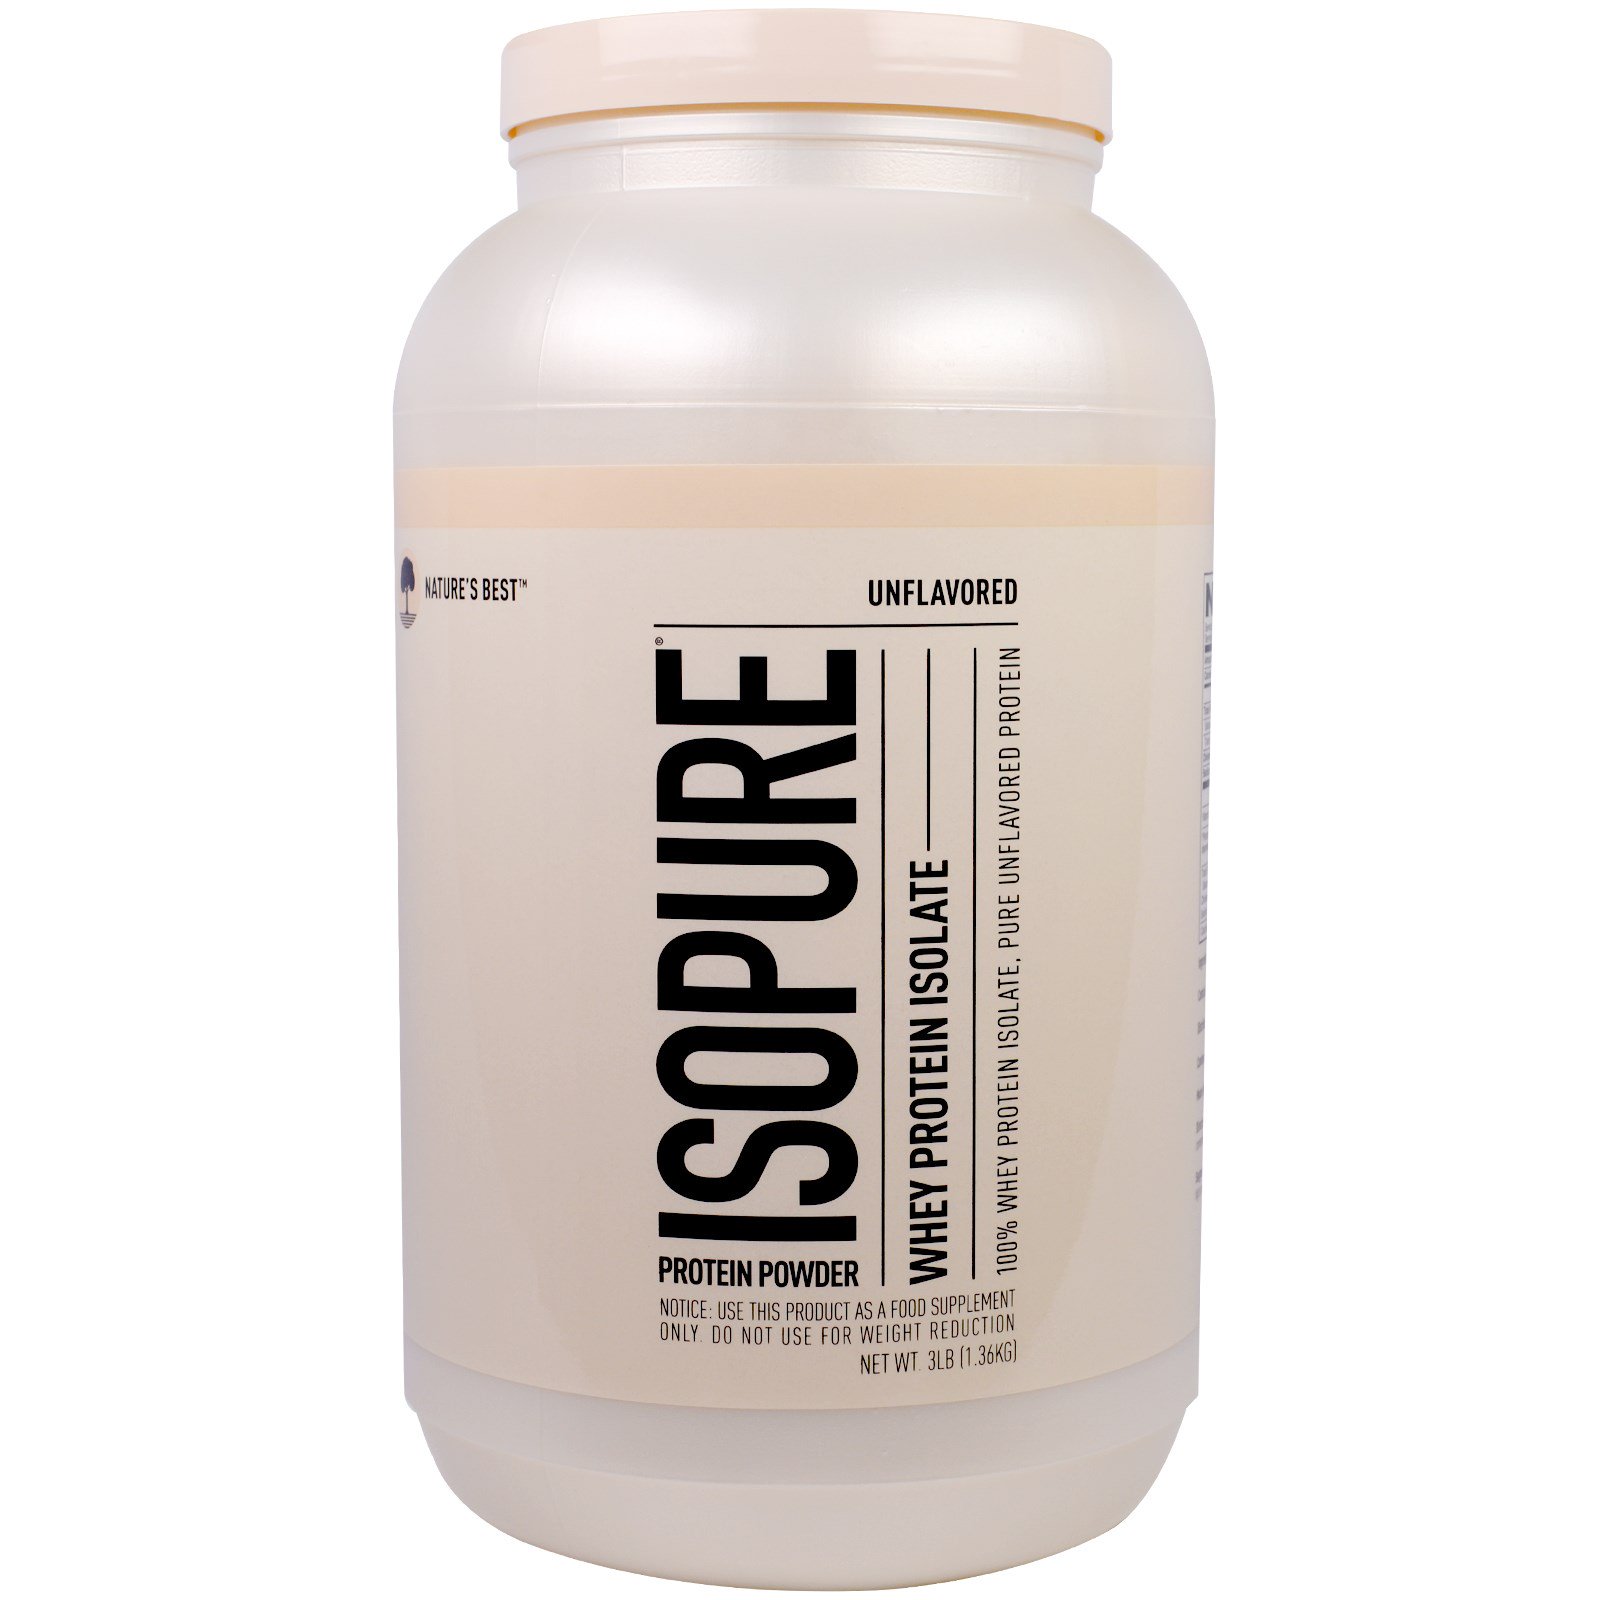 Isopure Whey Protein Isolate Powder, Unflavored, 25g 